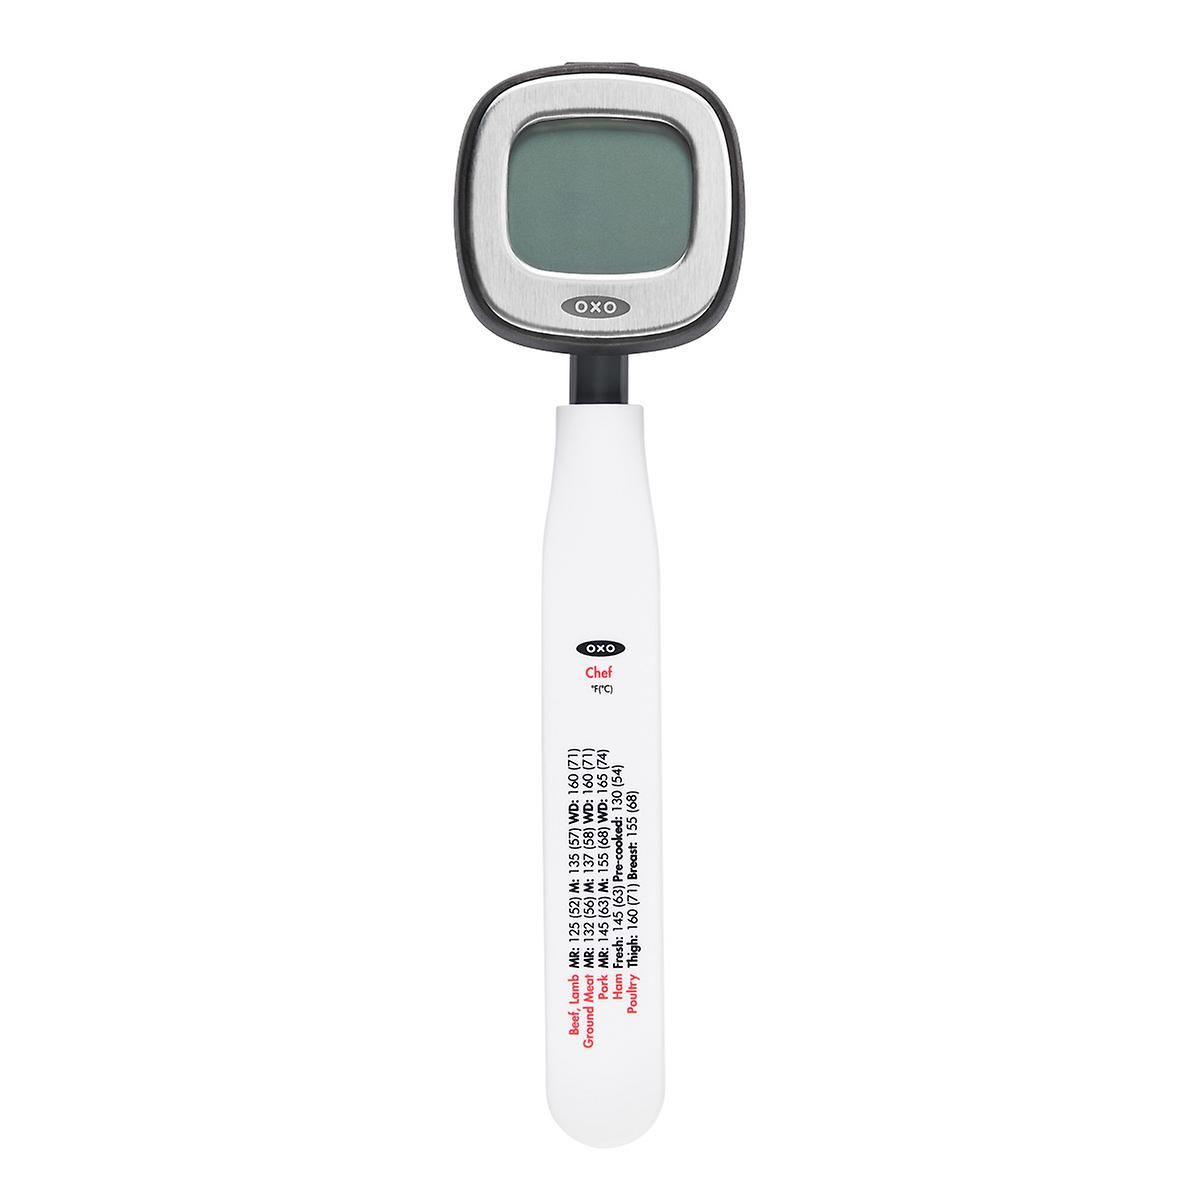 OXO Digital Thermometer | The Container Store